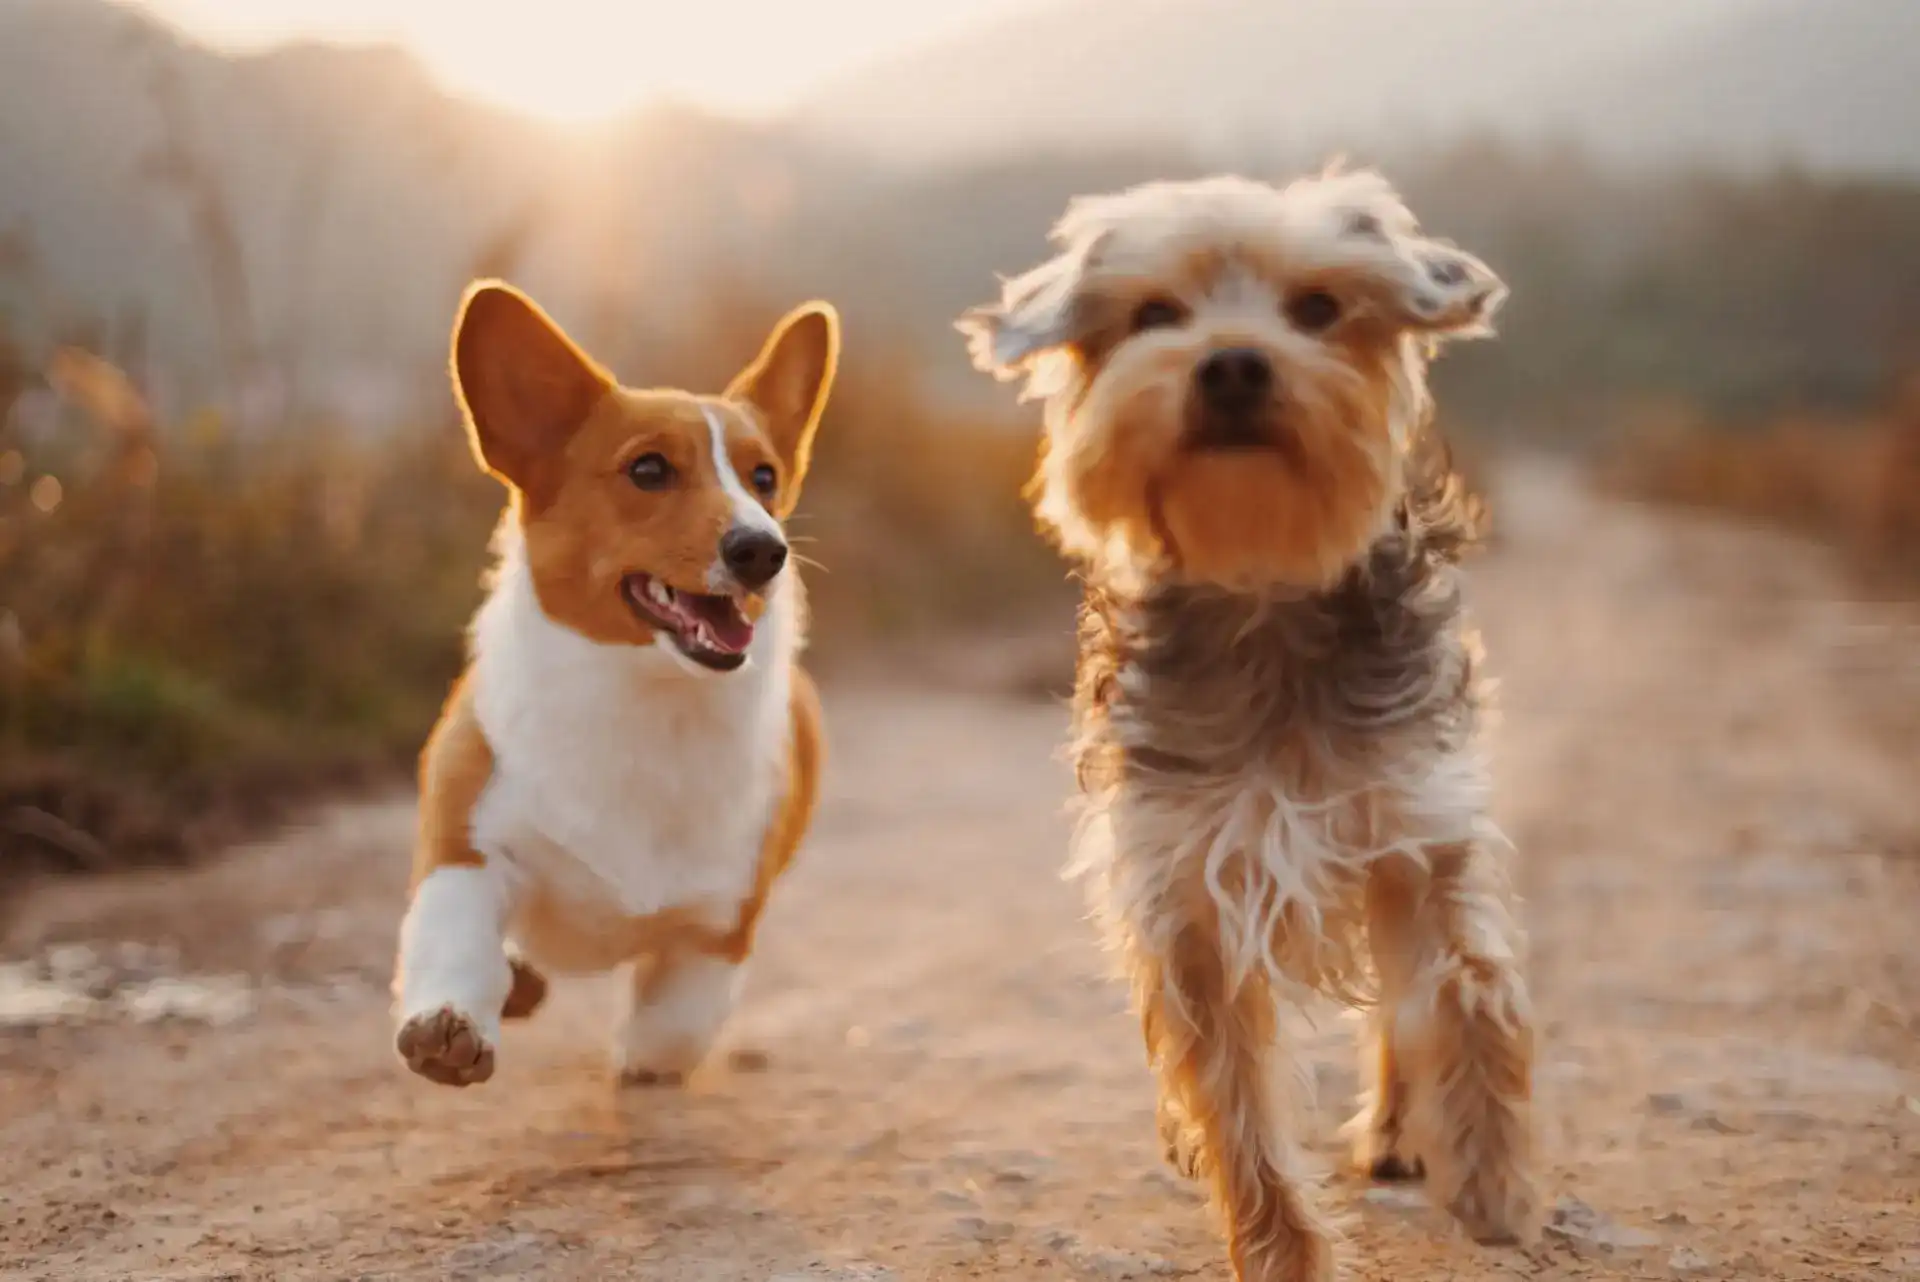 Two dog friends running together